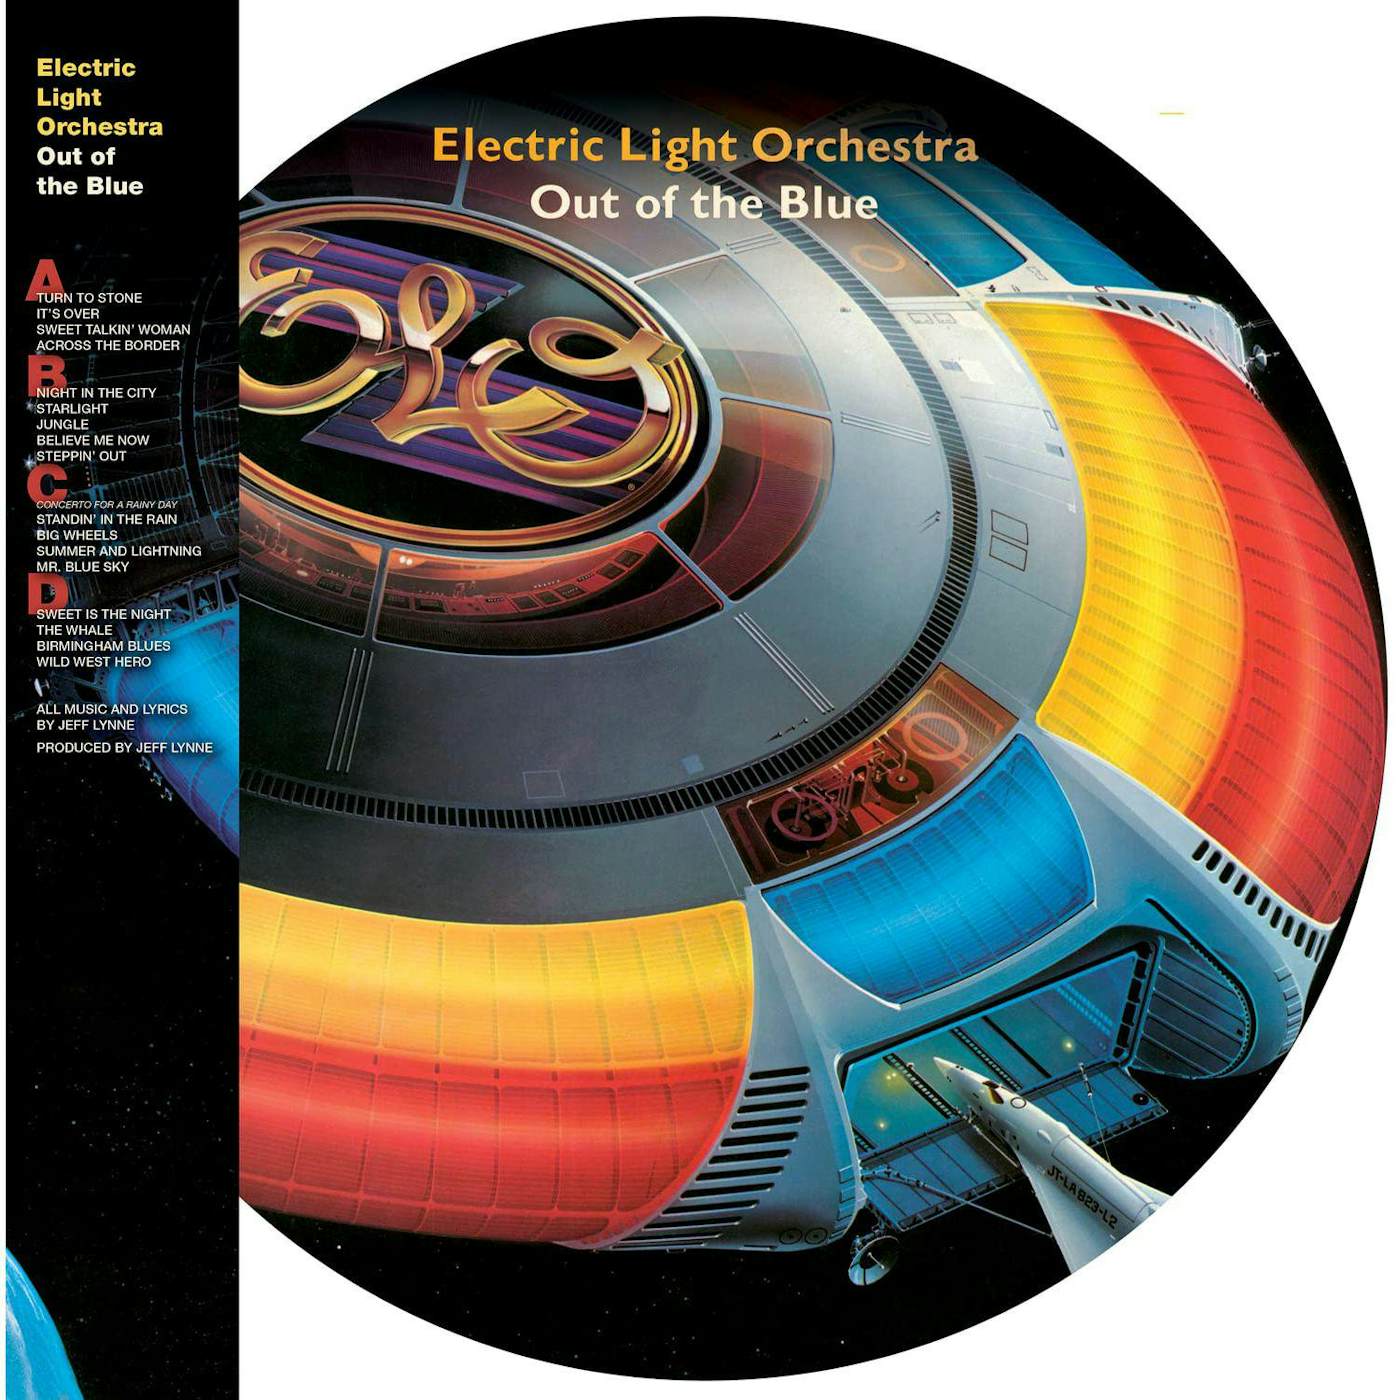 ELO (Electric Light Orchestra) Out Of The Blue (Picture Disc/2LP) Vinyl Record